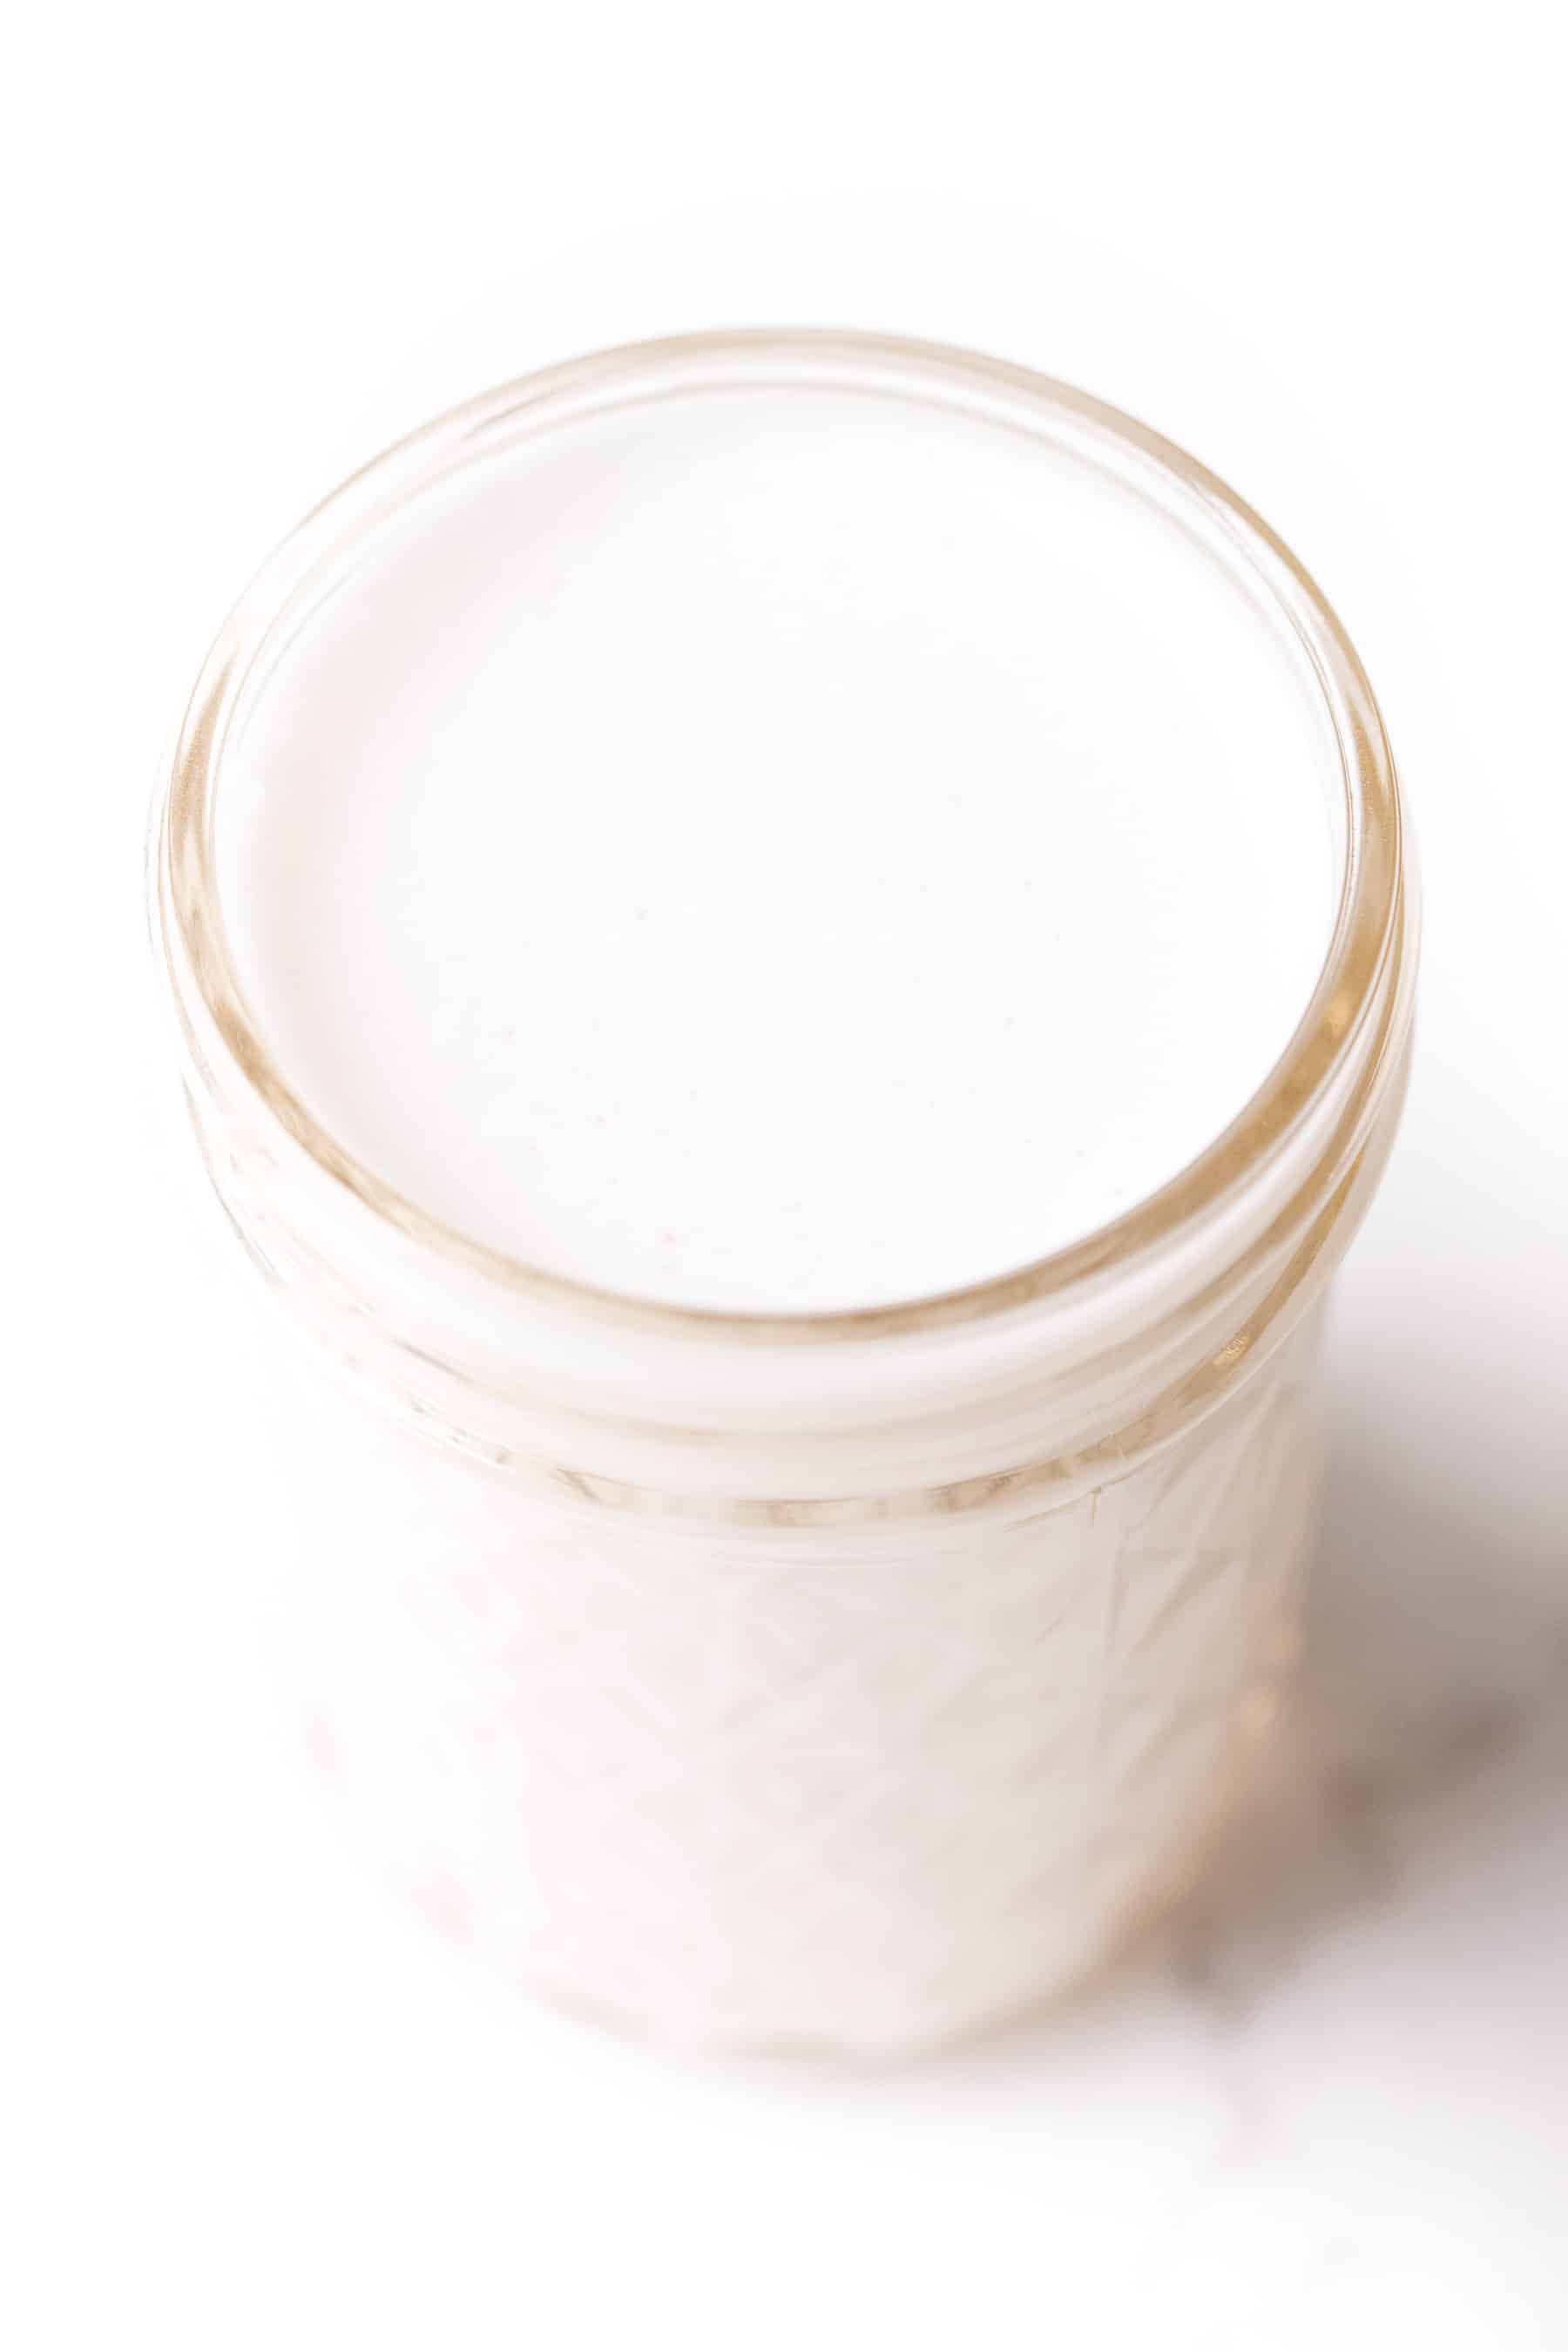 almond milk in a mason jar cup on a white background